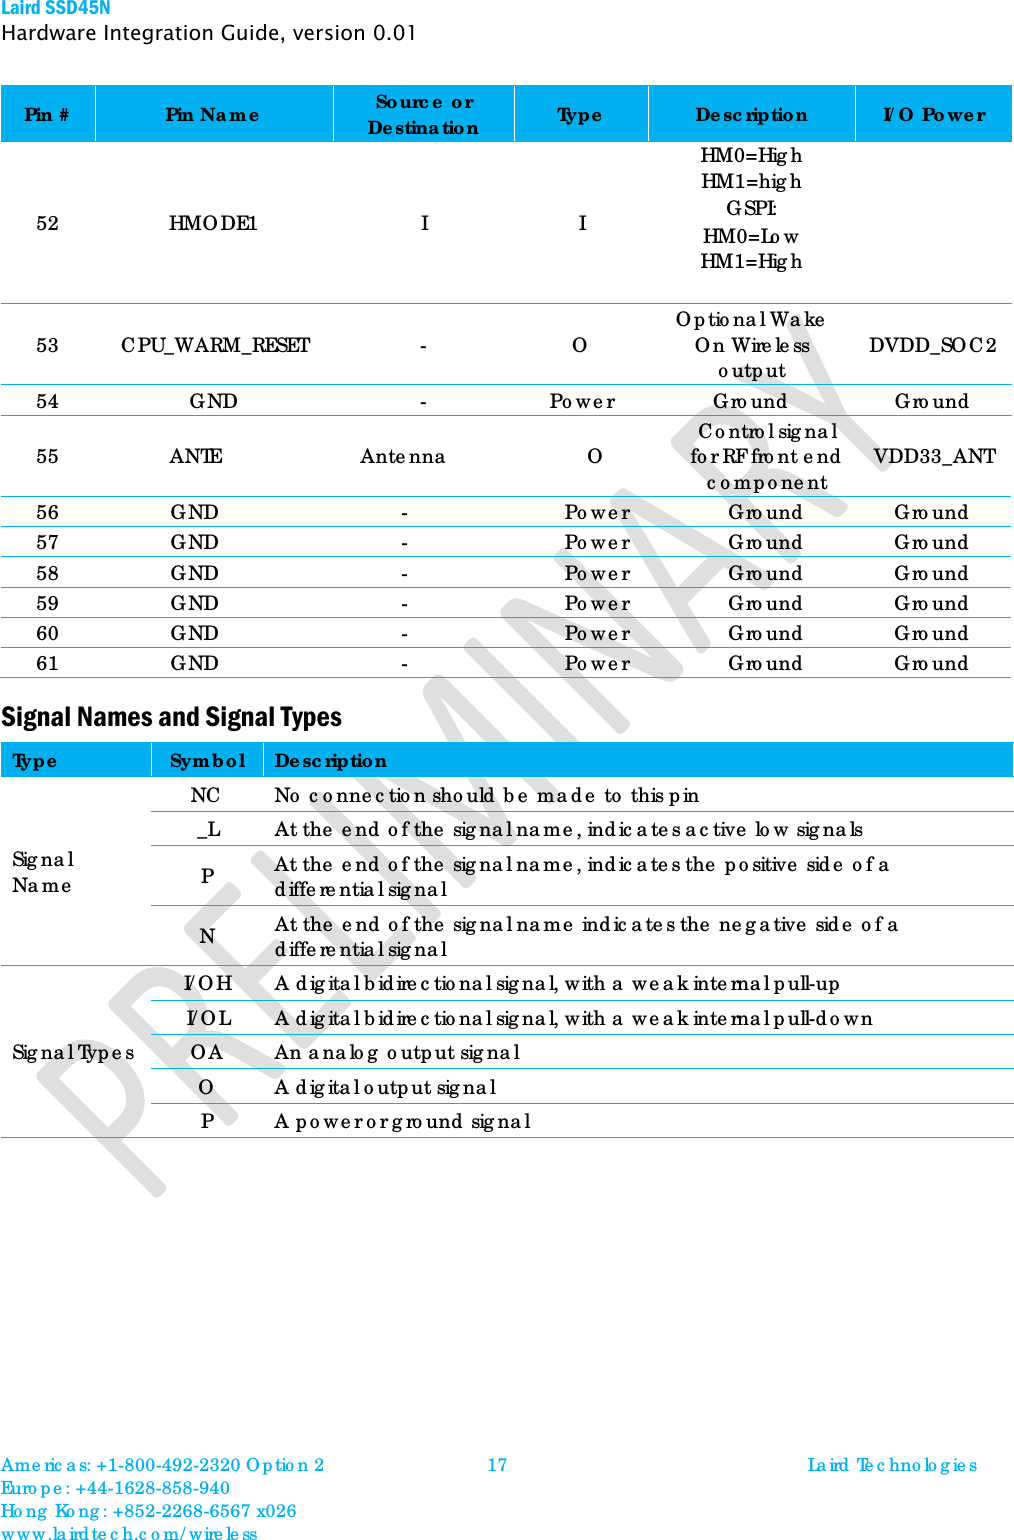 Laird SSD45N Hardware Integration Guide, version 0.01 Pin # Pin Name Source or Destination Type Description I/O Power 52  HMODE1  I  I HM0=High HM1=high GSPI: HM0=Low HM1=High  53  CPU_WARM_RESET  -  O  Optional Wake On Wireless output DVDD_SOC2 54 GND - Power Ground Ground 55  ANTE Antenna  O  Control signal for RF front end component VDD33_ANT 56 GND - Power Ground Ground 57 GND - Power Ground Ground 58 GND - Power Ground Ground 59 GND - Power Ground Ground 60 GND - Power Ground Ground 61 GND - Power Ground Ground Signal Names and Signal Types  Type Symbol Description Signal Name NC No connection should be made to this pin _L At the end of the signal name, indicates active low signals P  At the end of the signal name, indicates the positive side of a differential signal N  At the end of the signal name indicates the negative side of a differential signal Signal Types I/OH A digital bidirectional signal, with a weak internal pull-up I/OL A digital bidirectional signal, with a weak internal pull-down OA An analog output signal O  A digital output signal P  A power or ground signal    Americas: +1-800-492-2320 Option 2 Europe: +44-1628-858-940 Hong Kong: +852-2268-6567 x026 www.lairdtech.com/wireless 17 Laird Technologies  